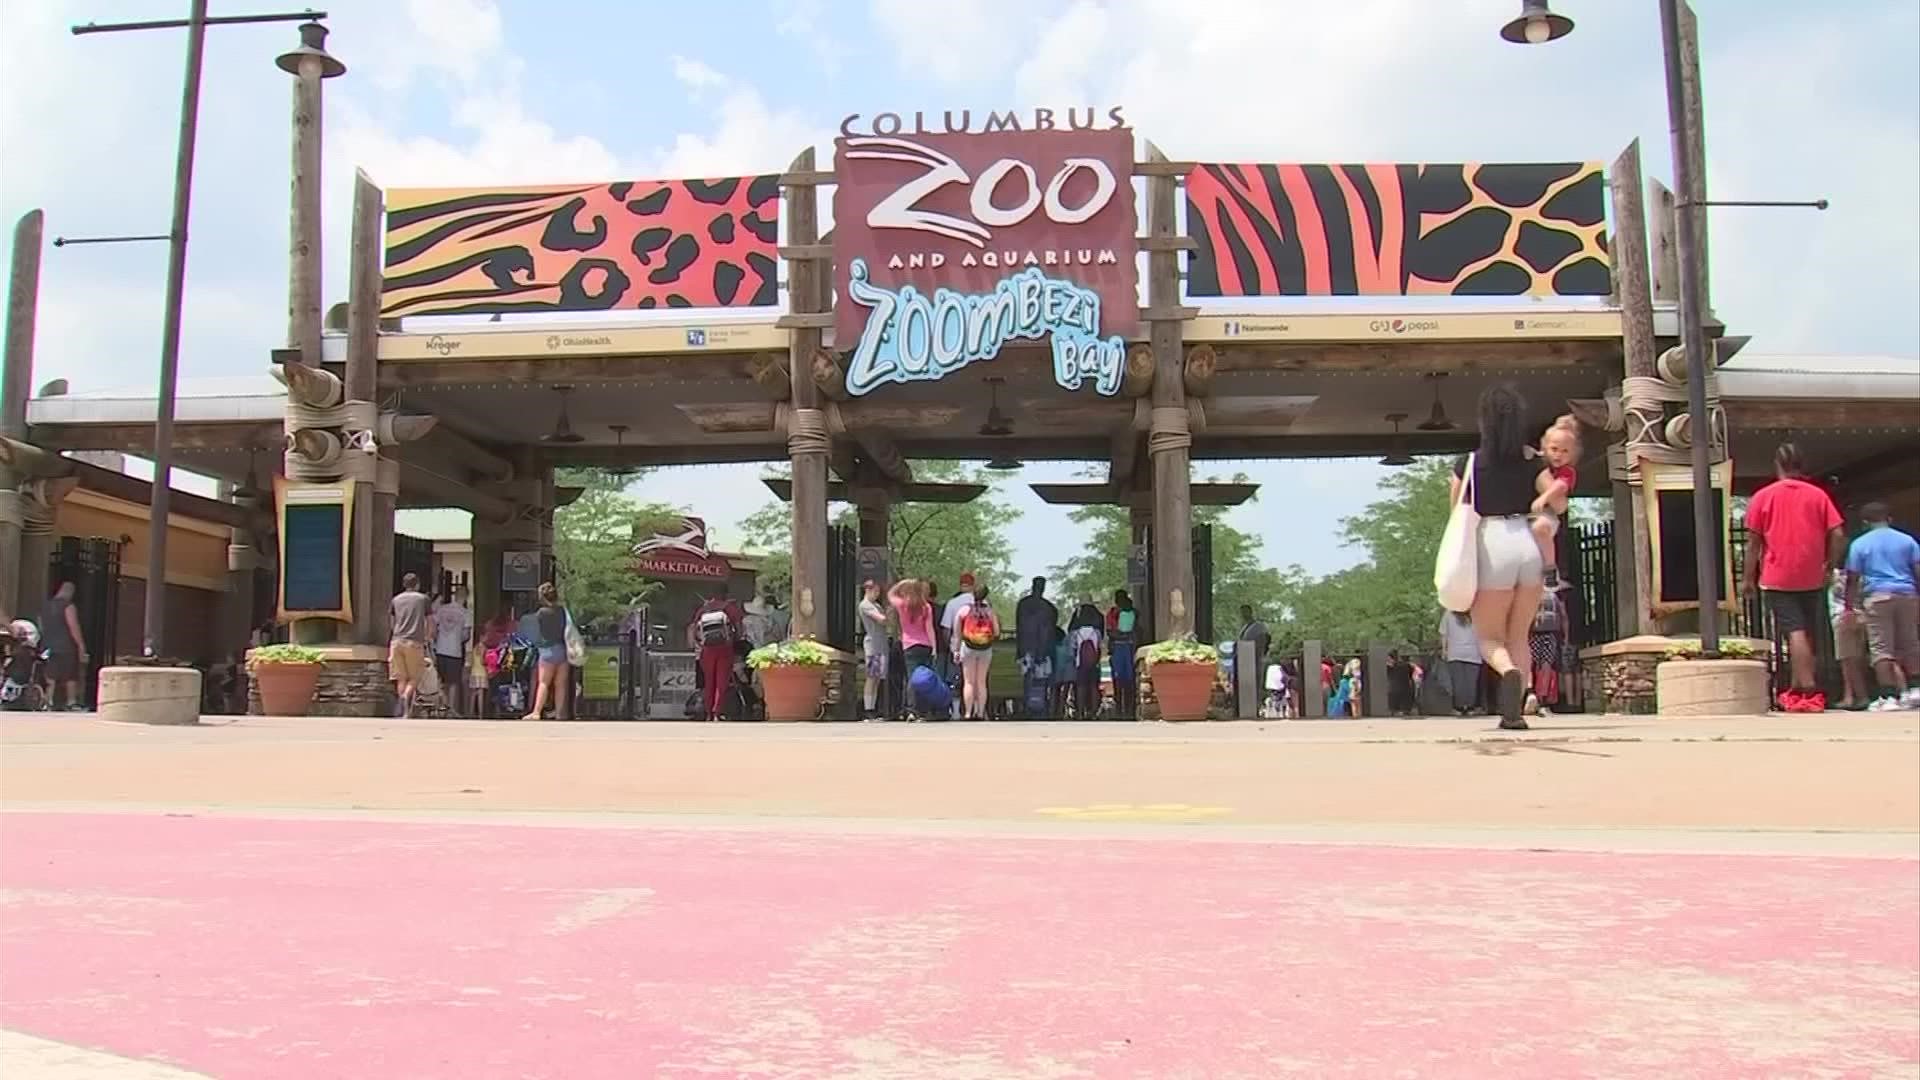 The soonest the Columbus Zoo can re-apply for accreditation is September 2022.